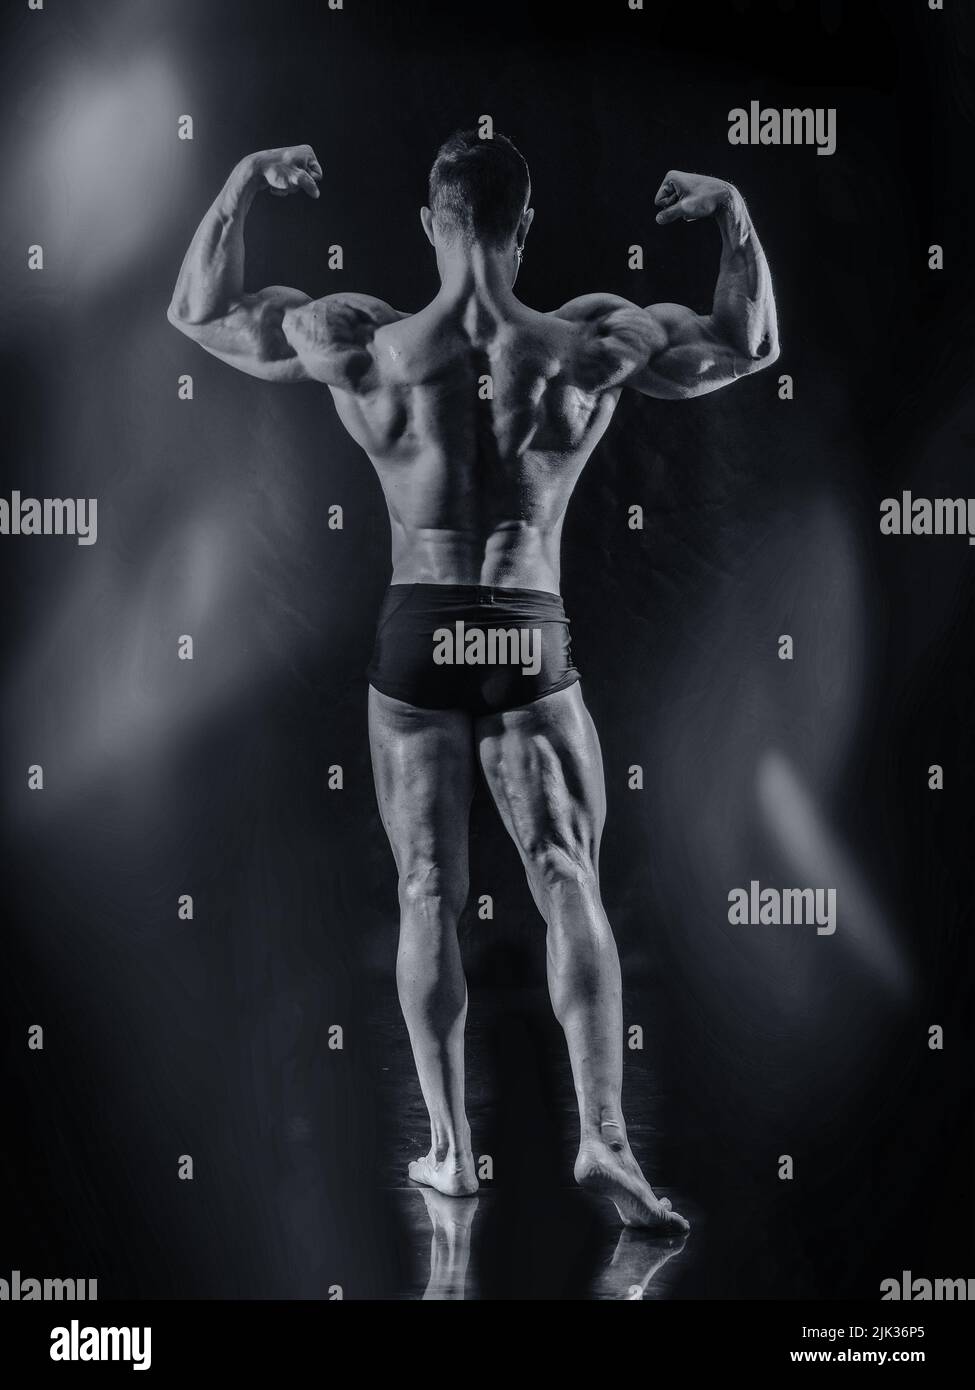 Handsome bodybuilder doing classic back double biceps pose, looking away, on dark background Stock Photo